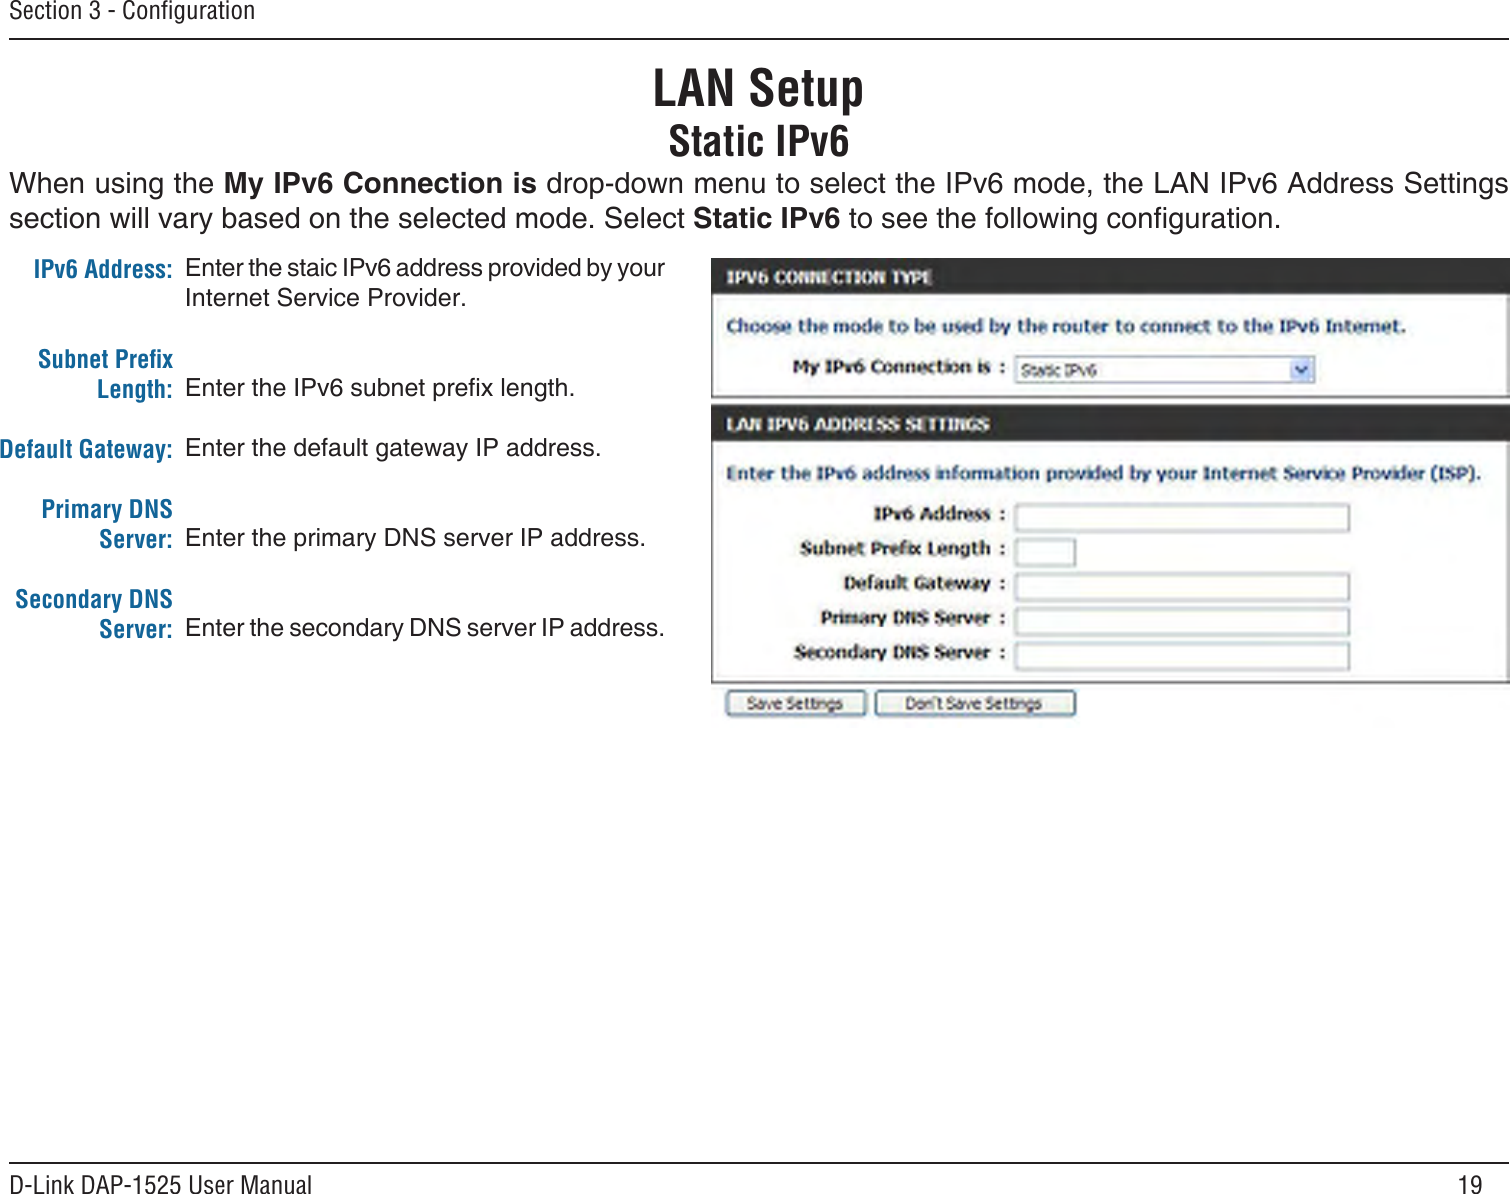 19D-Link DAP-1525 User ManualSection 3 - ConﬁgurationLAN SetupStatic IPv6Enter the staic IPv6 address provided by your Internet Service Provider.Enter the IPv6 subnet prex length.Enter the default gateway IP address.Enter the primary DNS server IP address.Enter the secondary DNS server IP address.IPv6 Address:Subnet Preﬁx Length:Default Gateway:Primary DNS Server:Secondary DNS Server:When using the My IPv6 Connection is drop-down menu to select the IPv6 mode, the LAN IPv6 Address Settings section will vary based on the selected mode. Select Static IPv6 to see the following conguration.